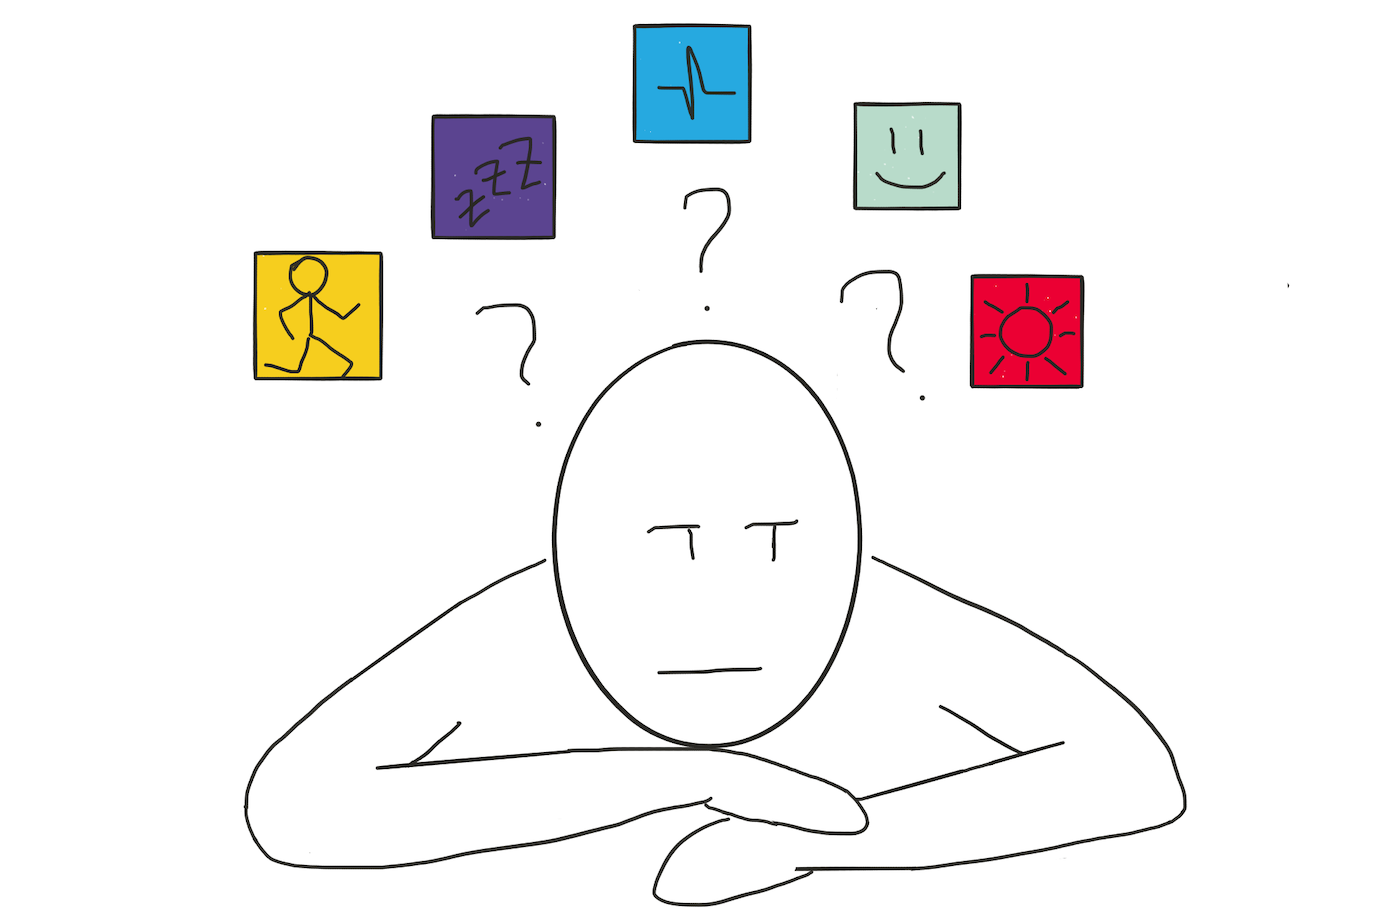 An illustration of a person thinking about different activities that personal trackers capture